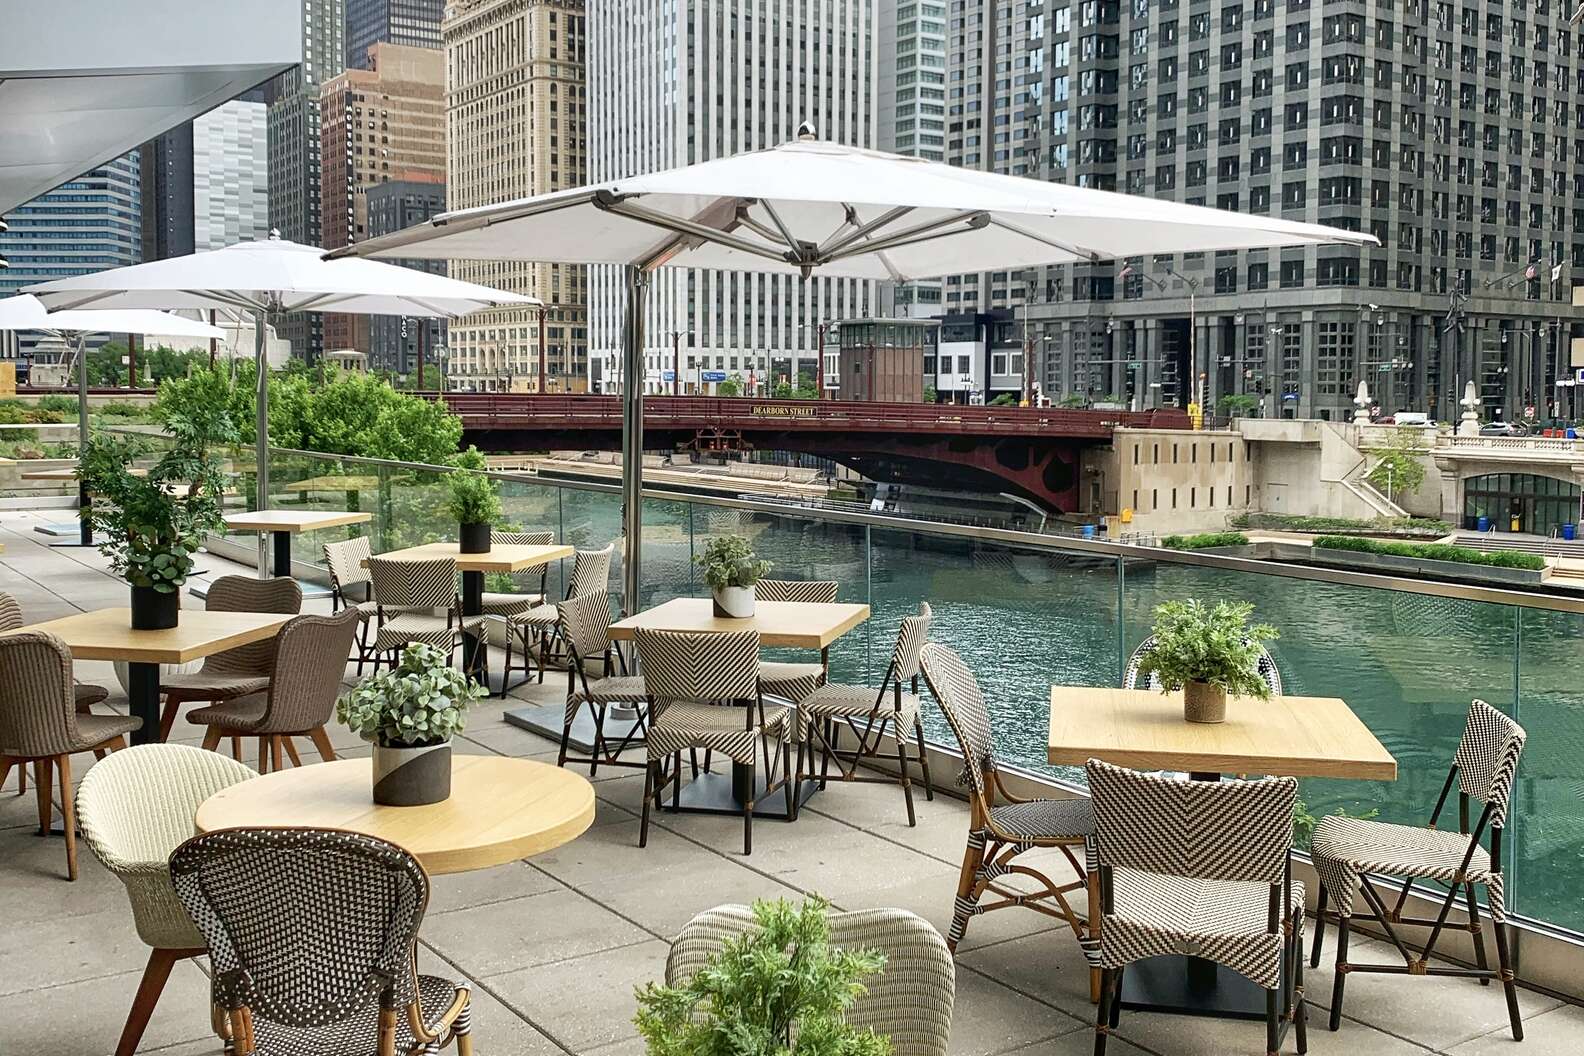 Chicago Outdoor Dining What to Know About Restaurants & Bars Reopening